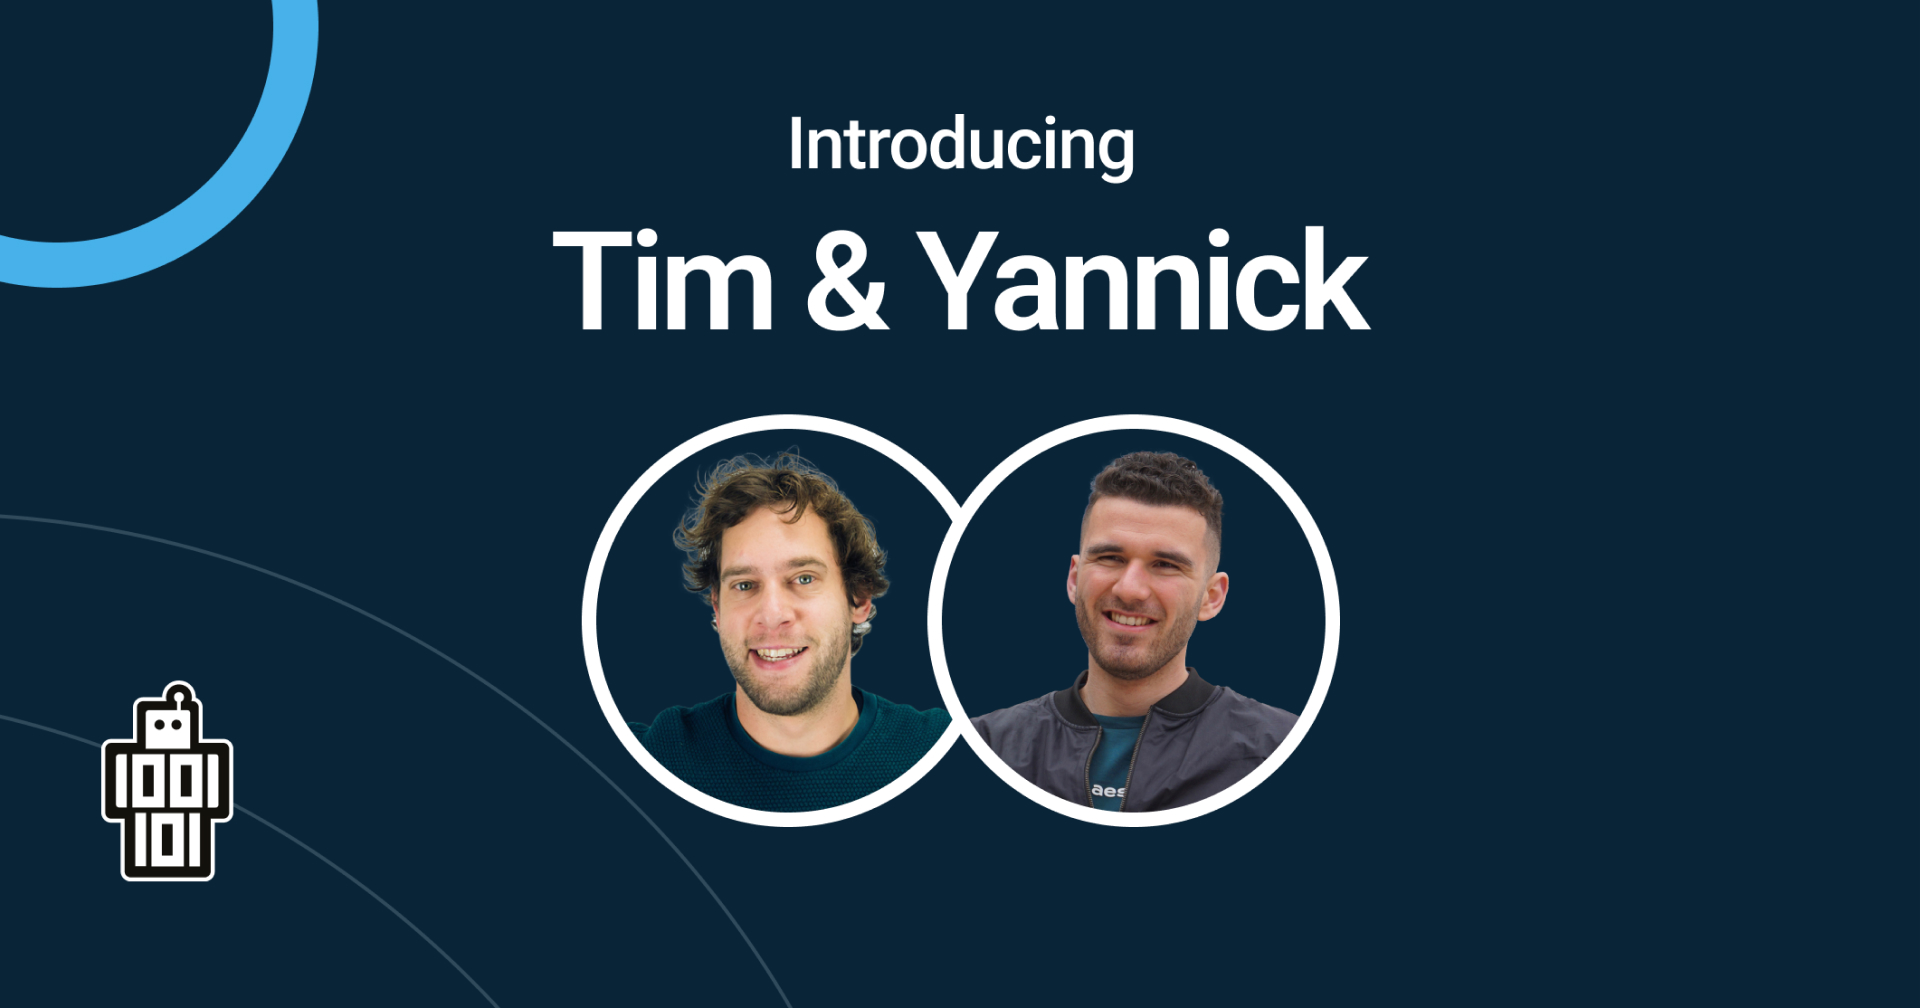 Meet Tim en Yannick - We would like to introduce you to our newest additions Tim en Yannick